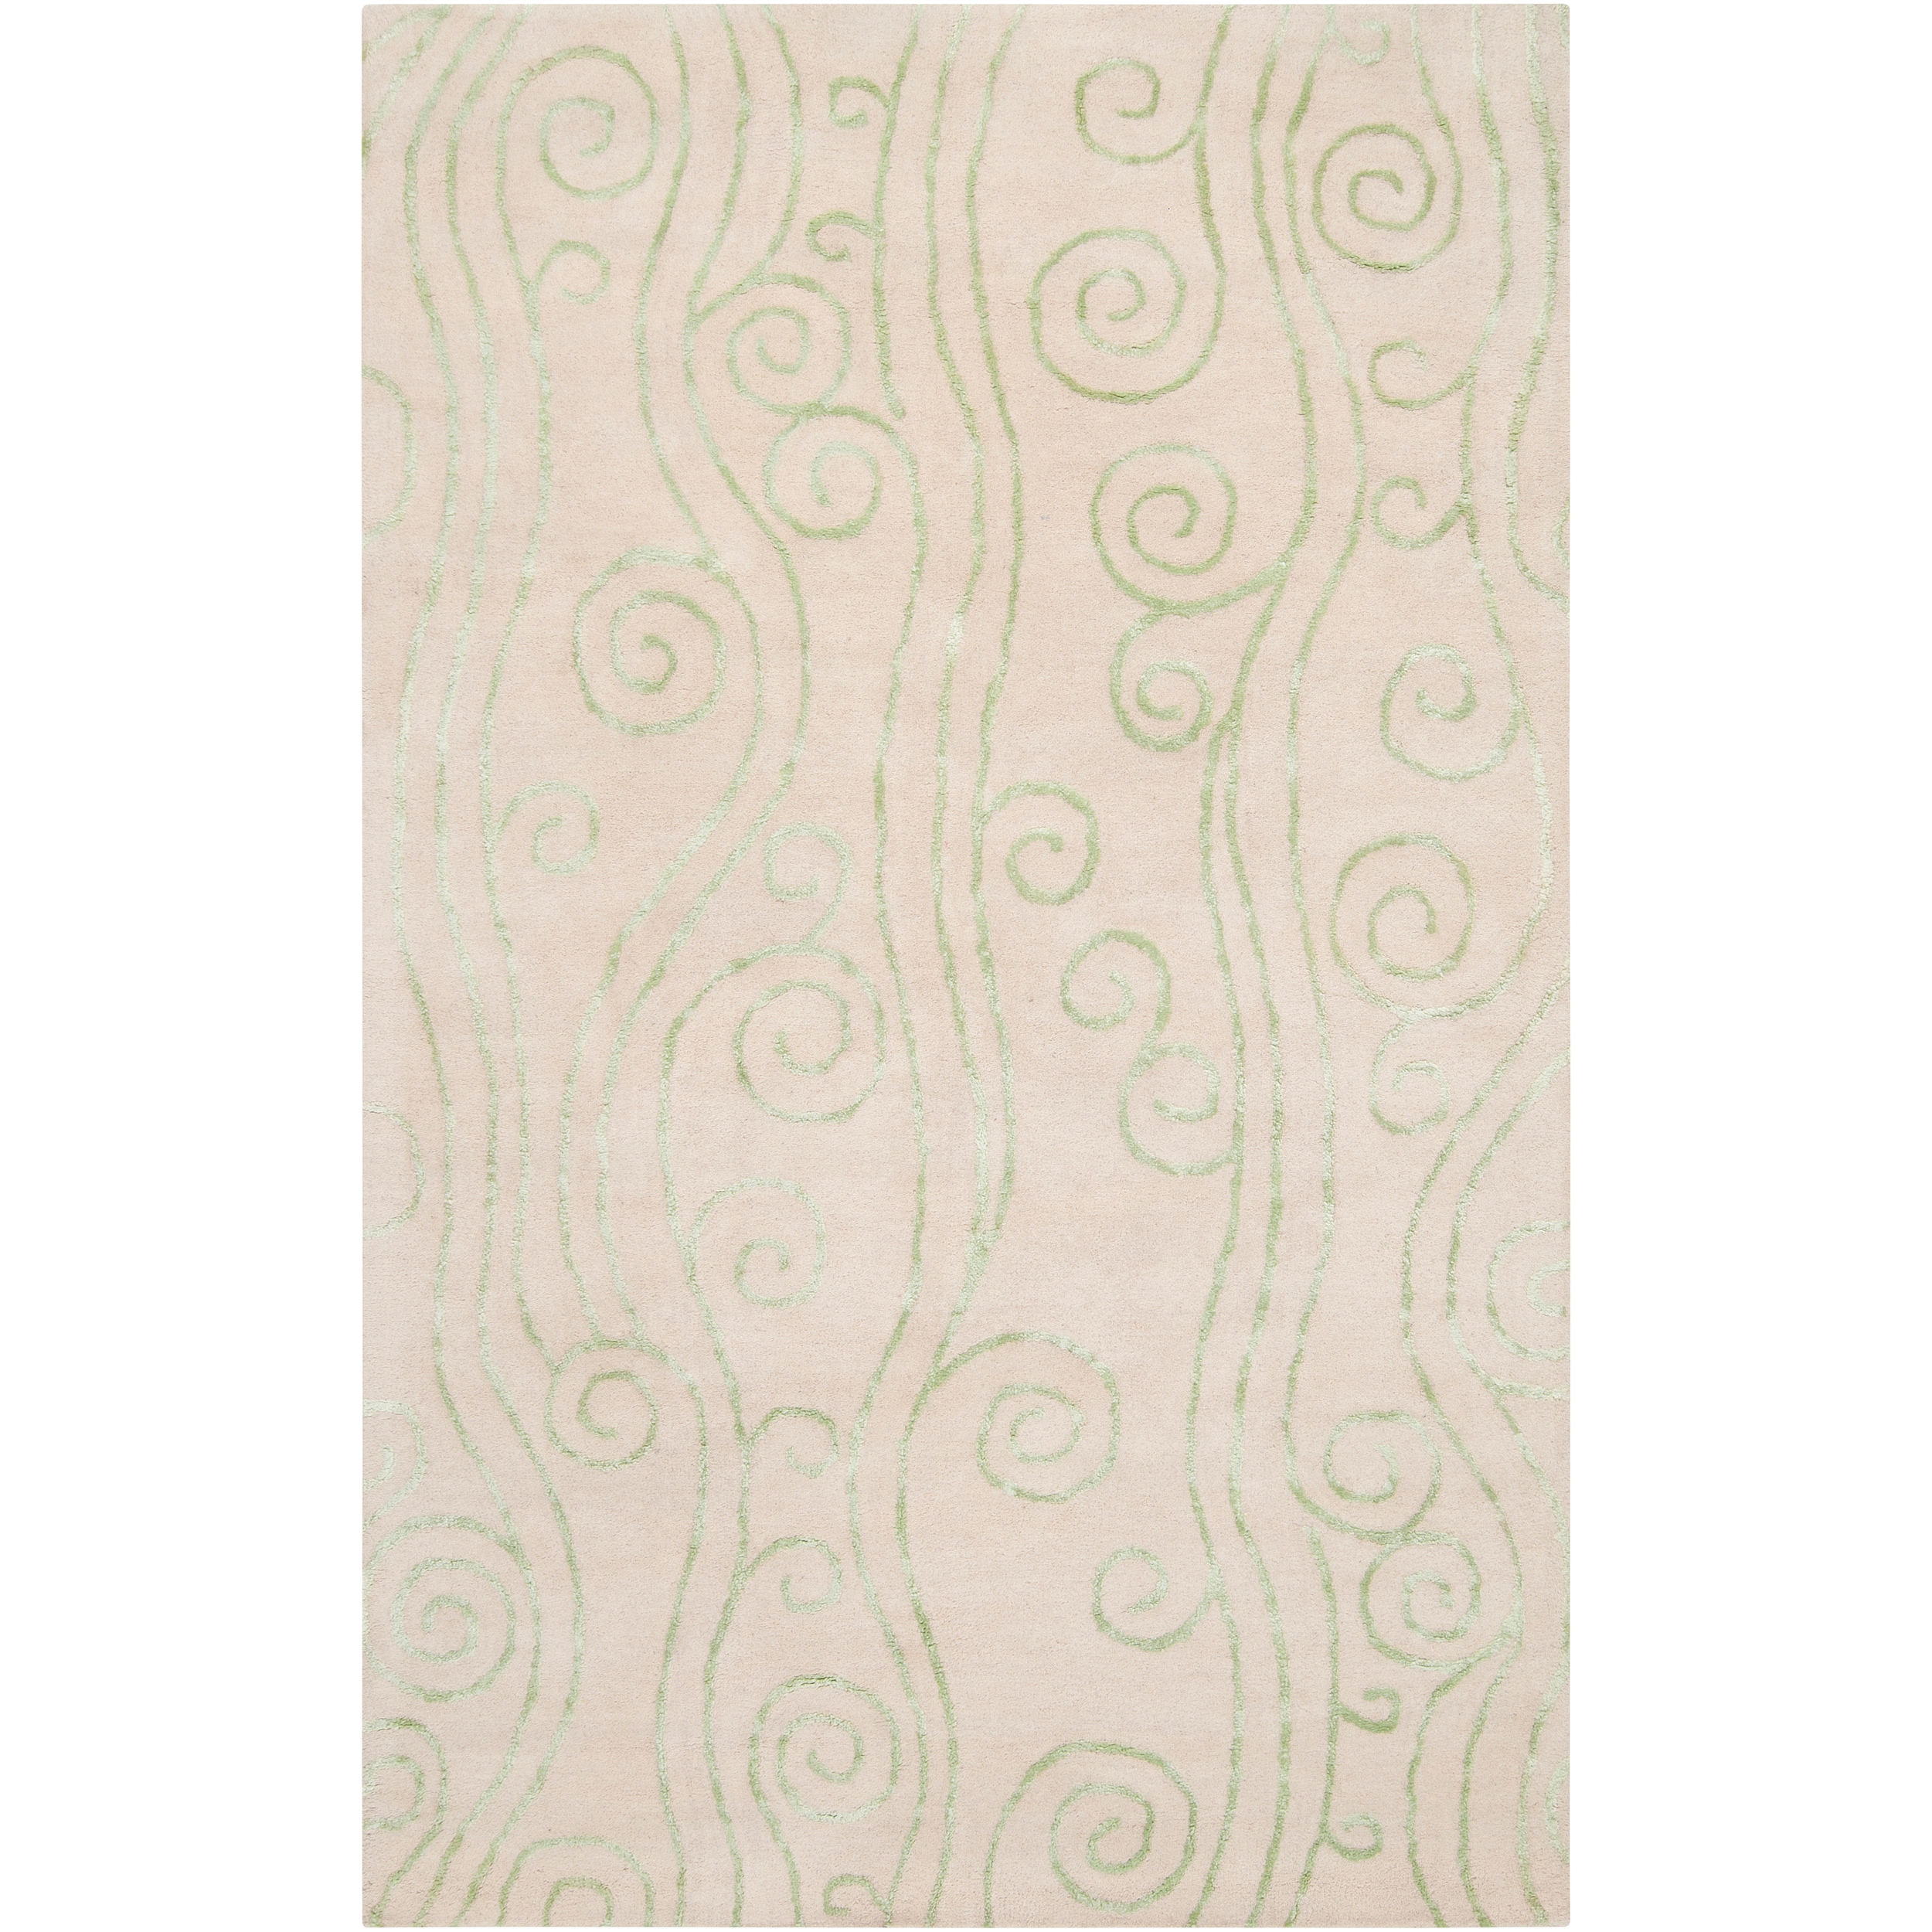 Abstract Somerset Bay Hand tufted Bacelot Bay Green Beach inspired Wool Rug (5 X 8)